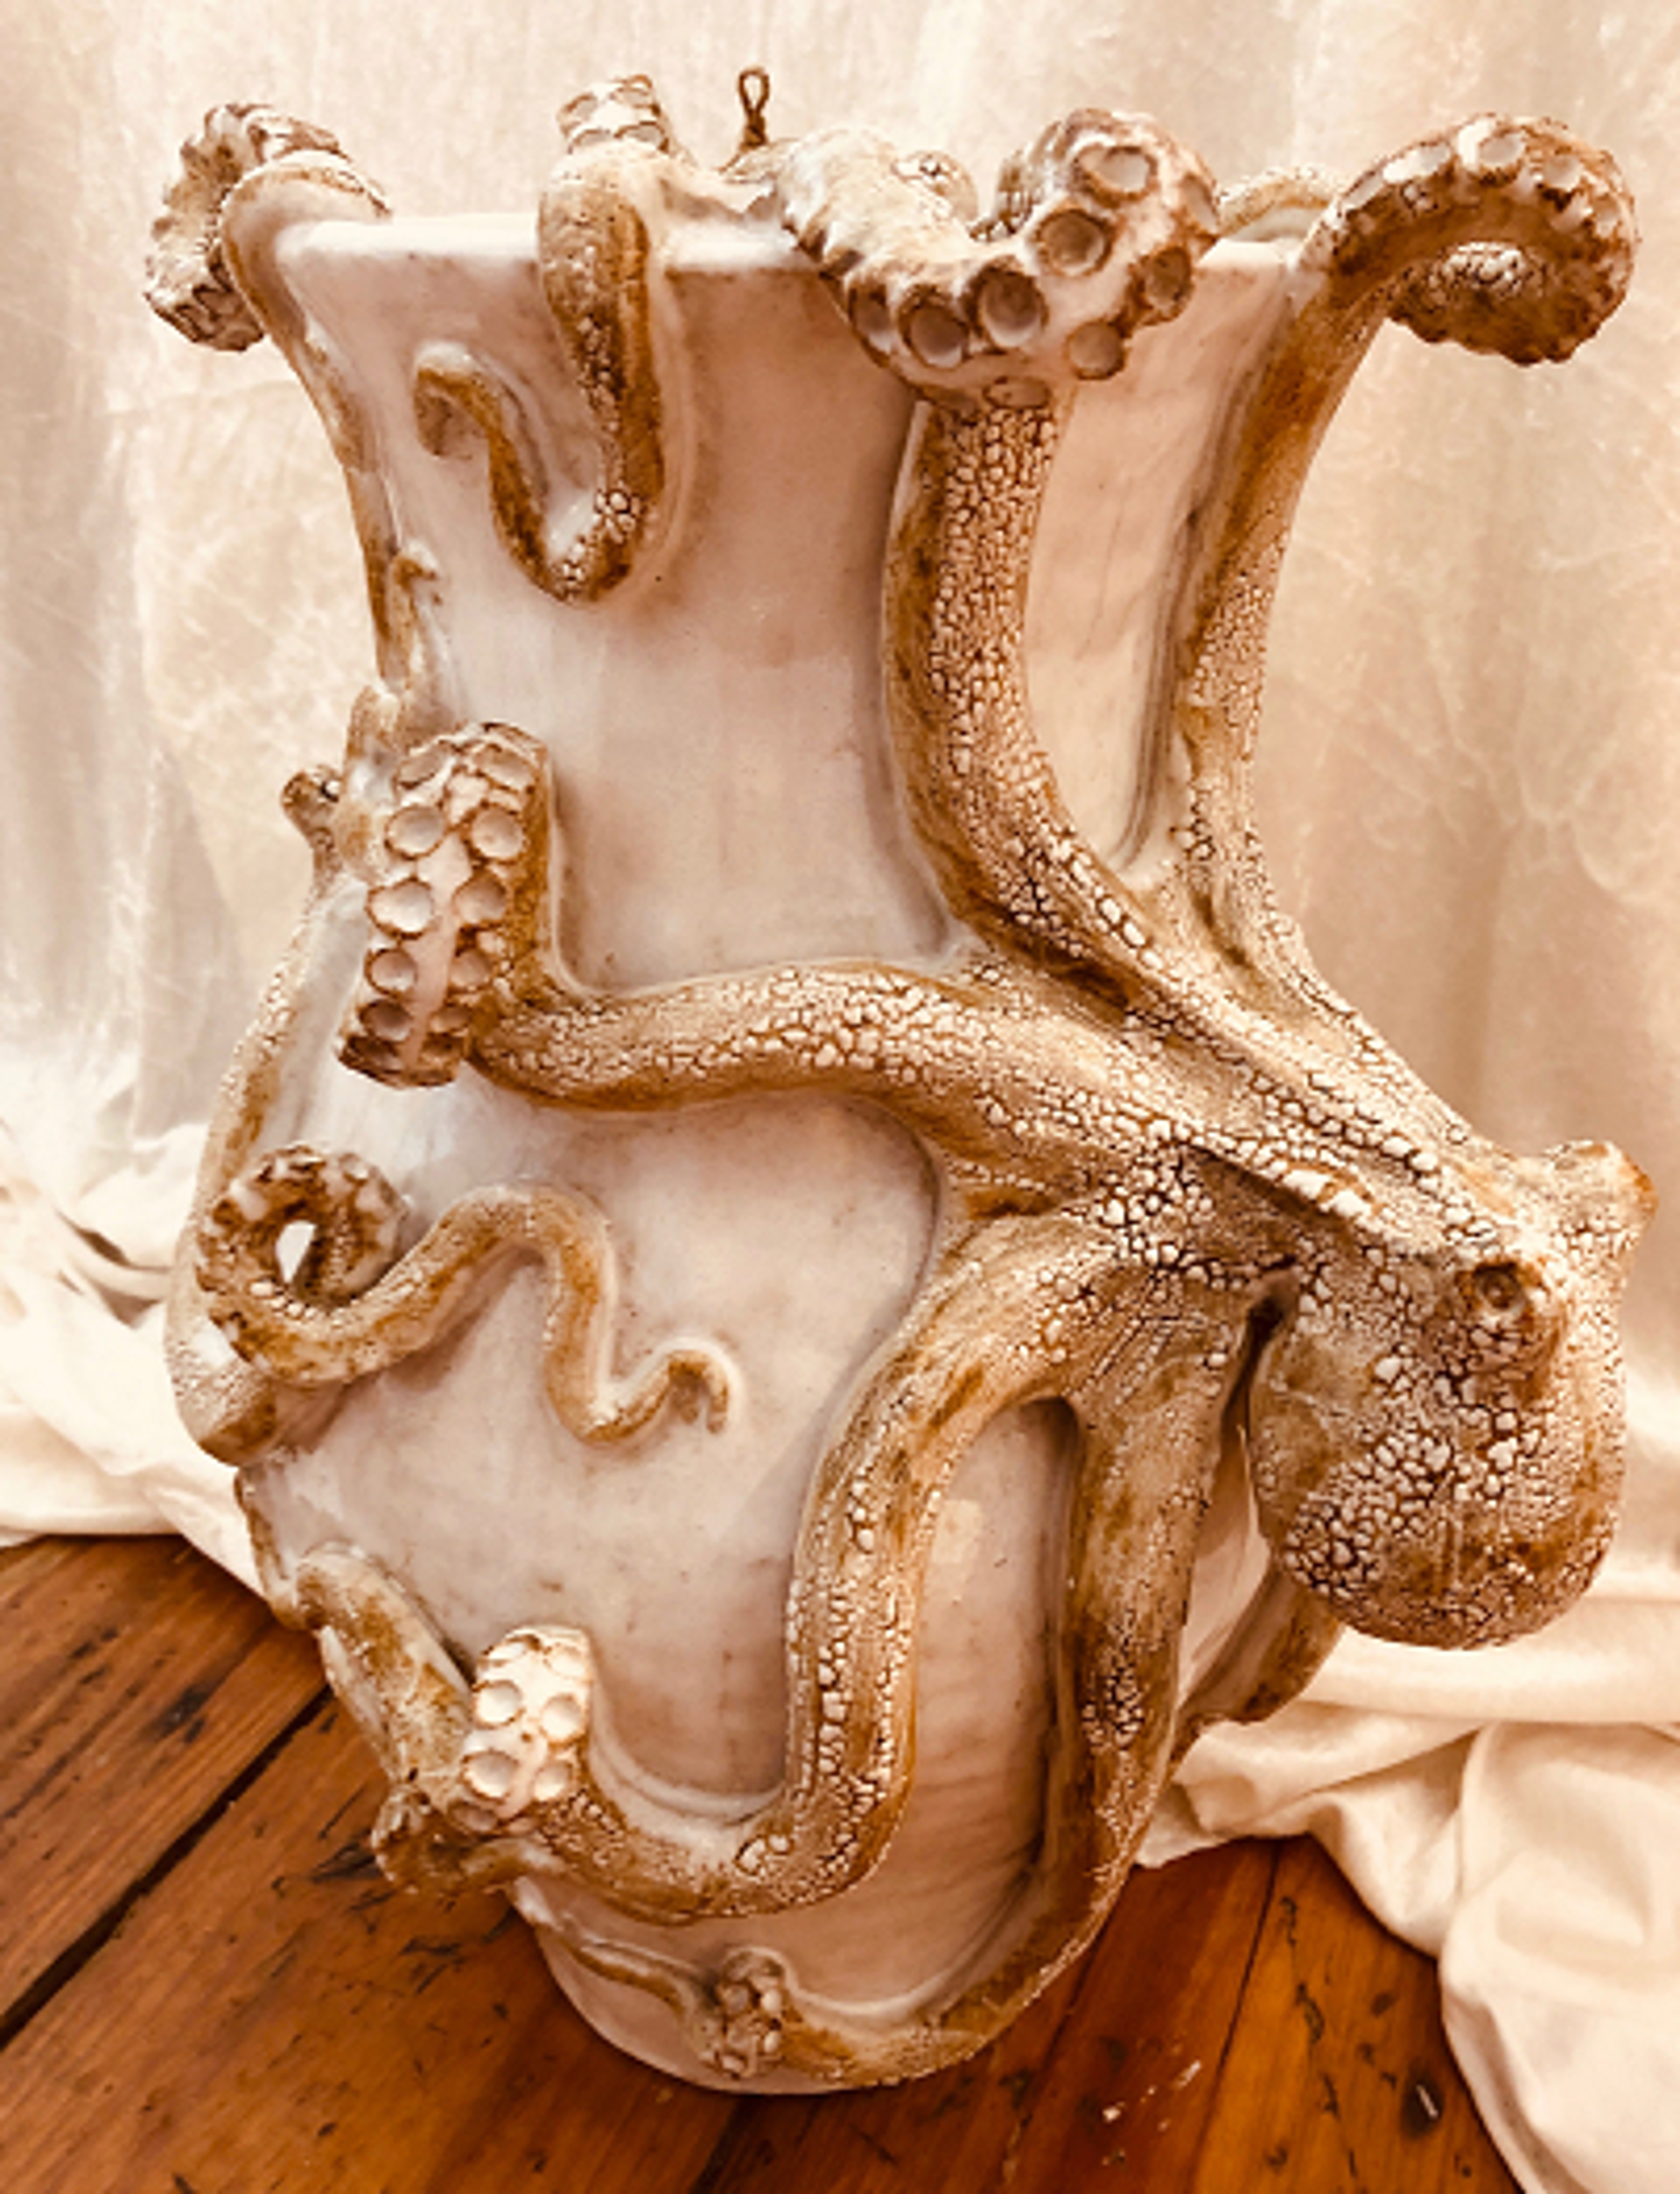 Double Octopus Vase by Shayne Greco